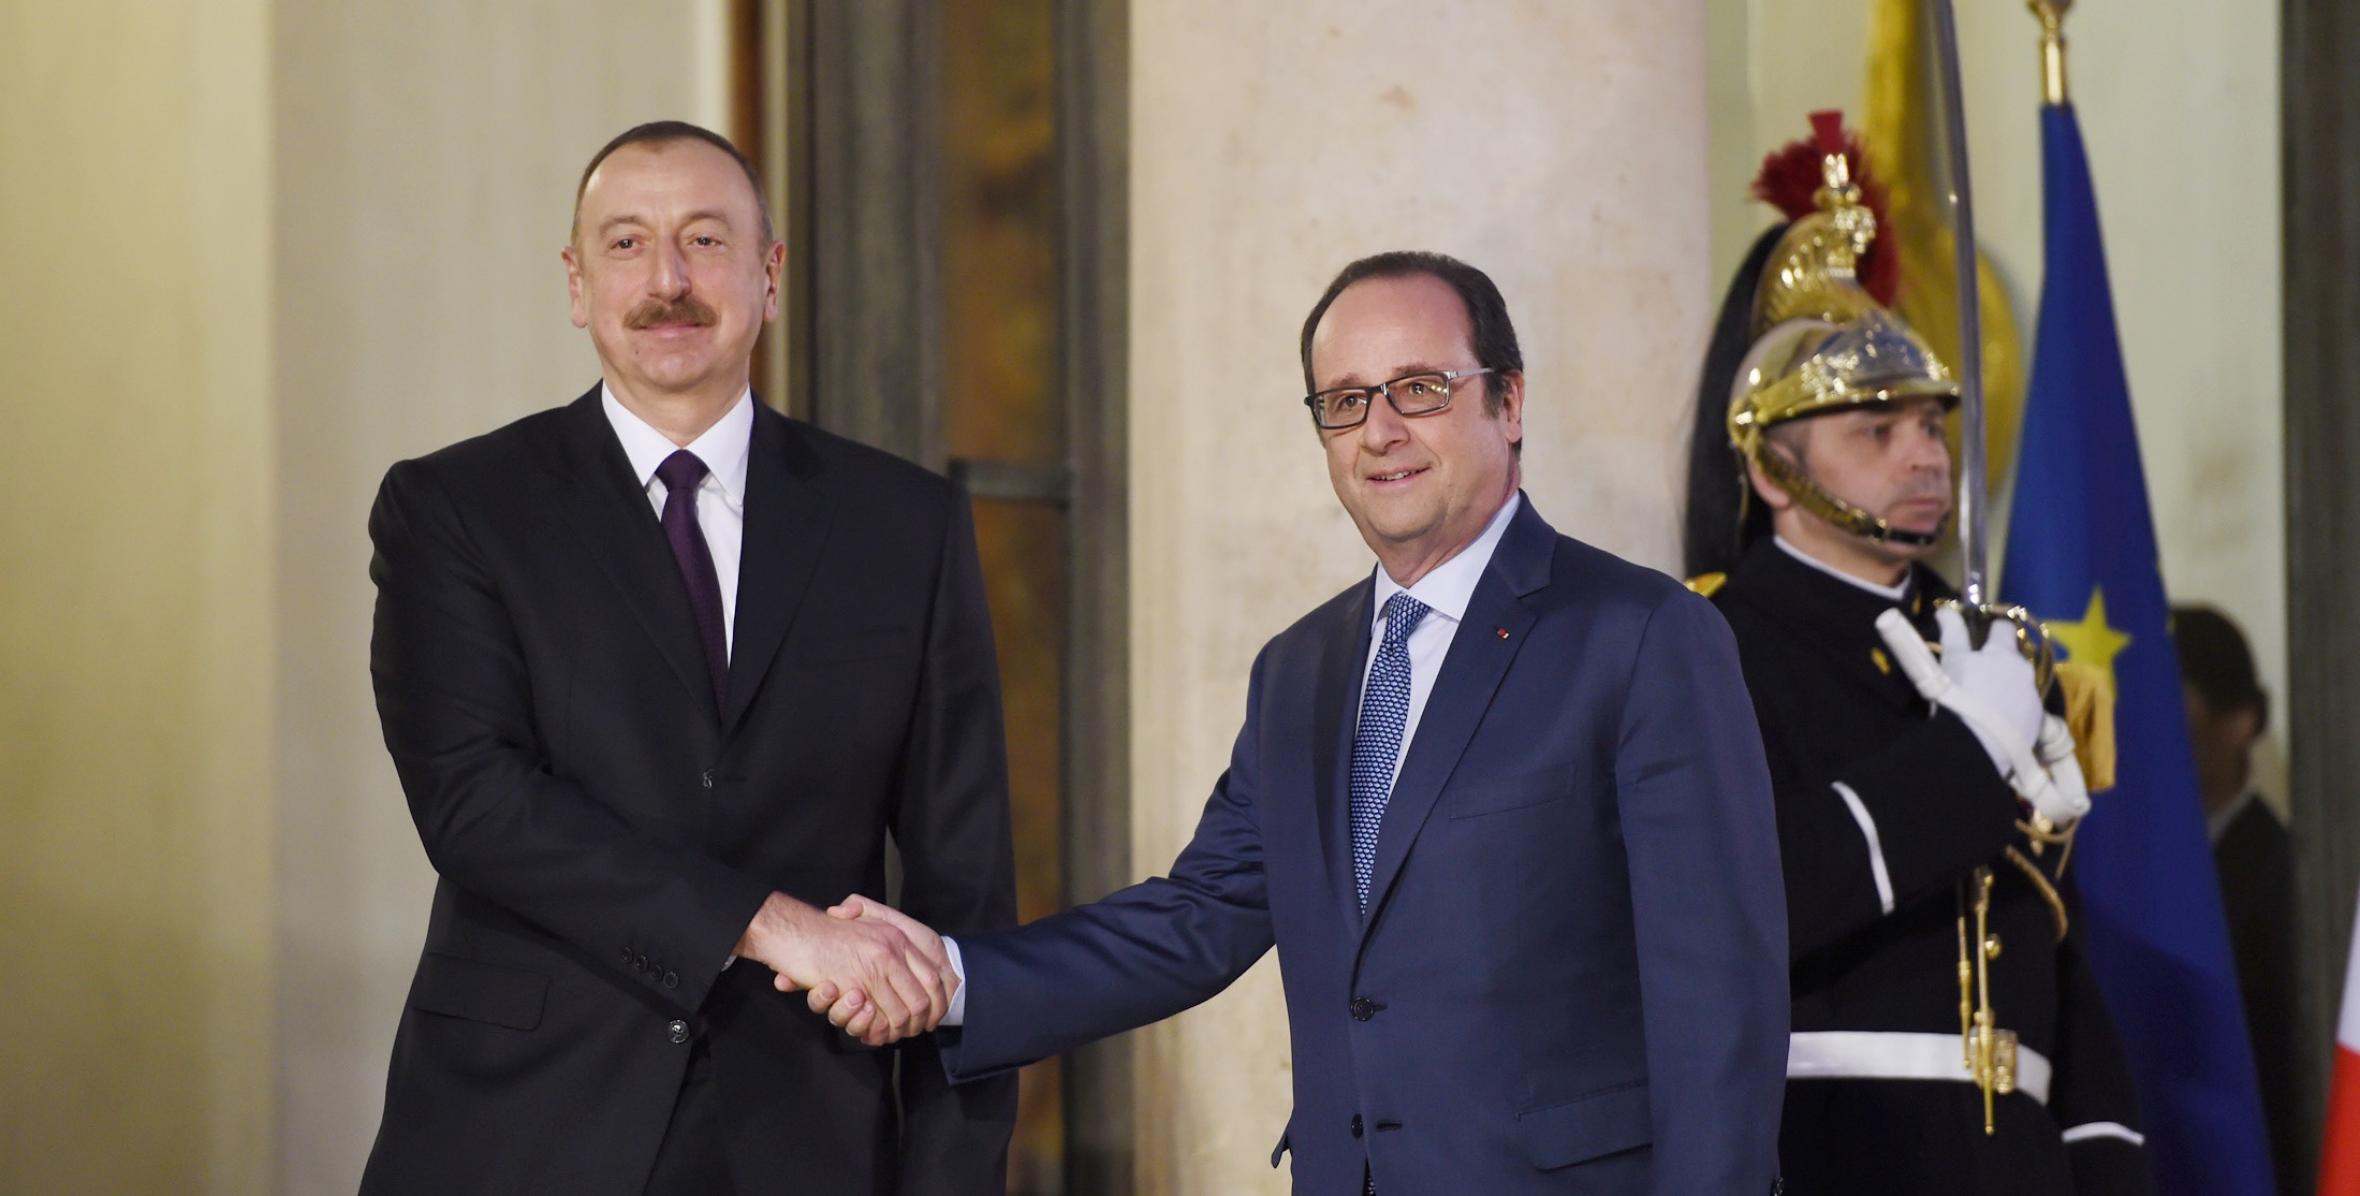 Official visit of Ilham Aliyev to France